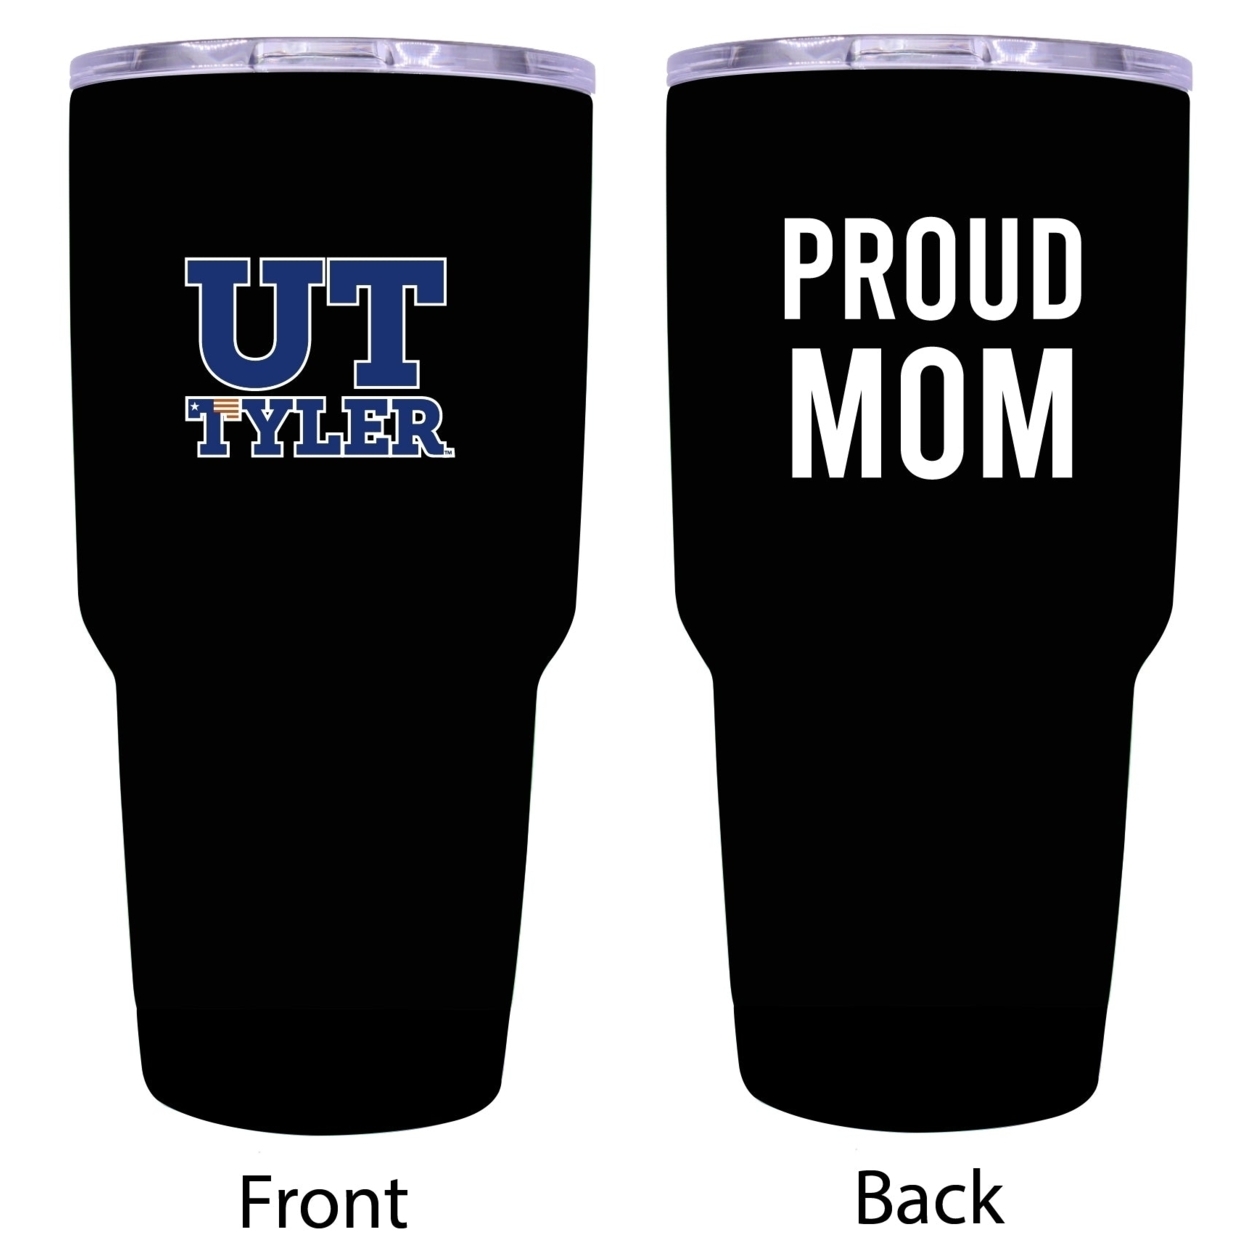 R And R Imports The University Of Texas At Tyler Proud Mom 24 Oz Insulated Stainless Steel Tumblers Black.